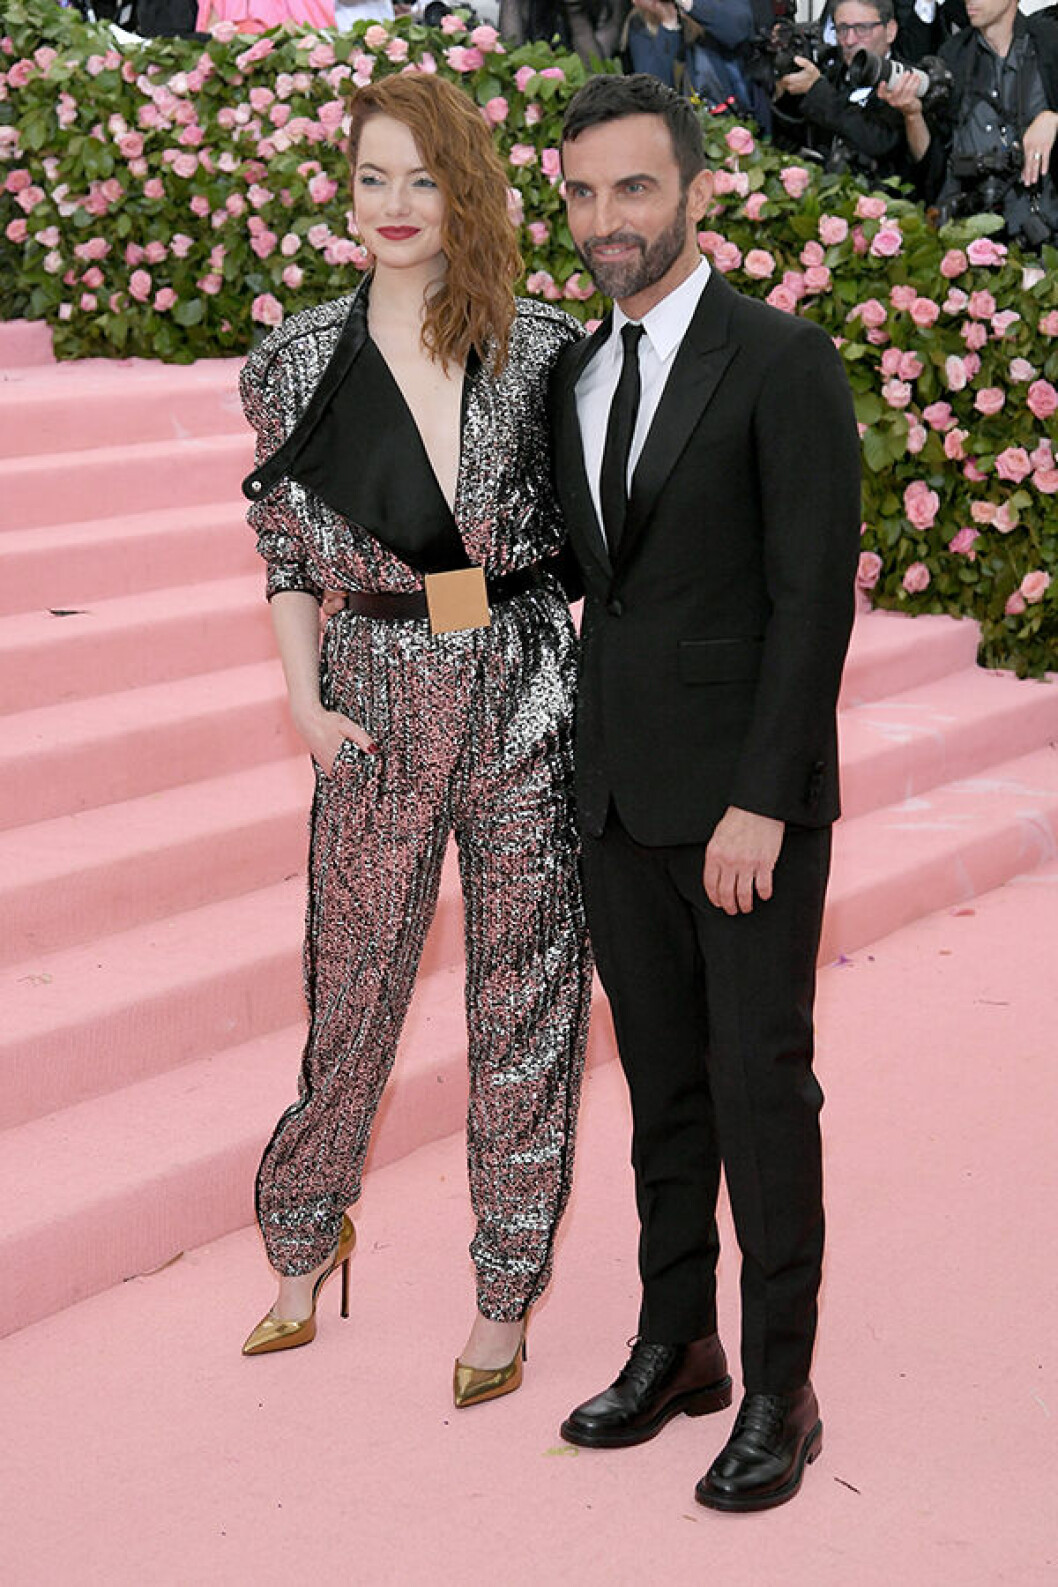 NEW YORK, NEW YORK &#8211; MAY 06: Emma Stone and Nicolas Ghesquière attend The 2019 Met Gala Celebrating Camp: Notes on Fashion at Metropolitan Museum of Art on May 06, 2019 in New York City. (Photo by Neilson Barnard/Getty Images)